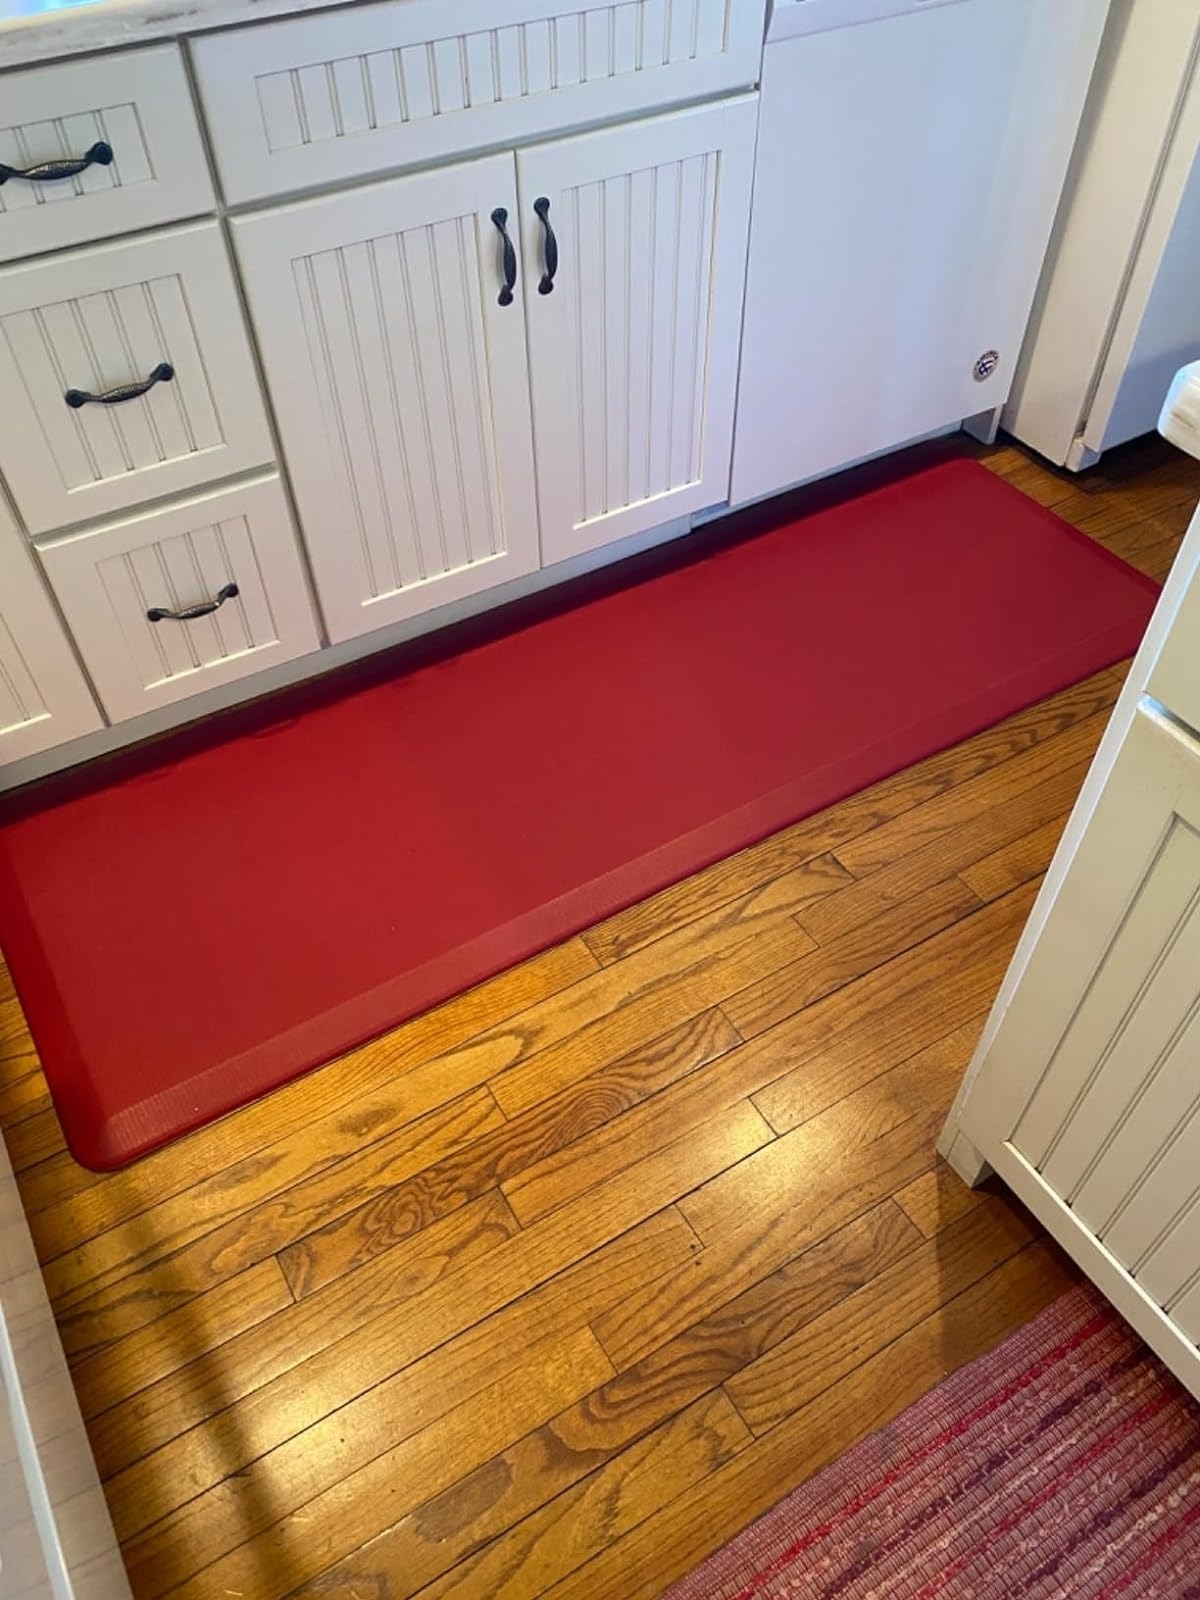 Red anti-fatigue kitchen mat in front of a white cabinet, suitable for long-standing comfort while shopping for kitchenware